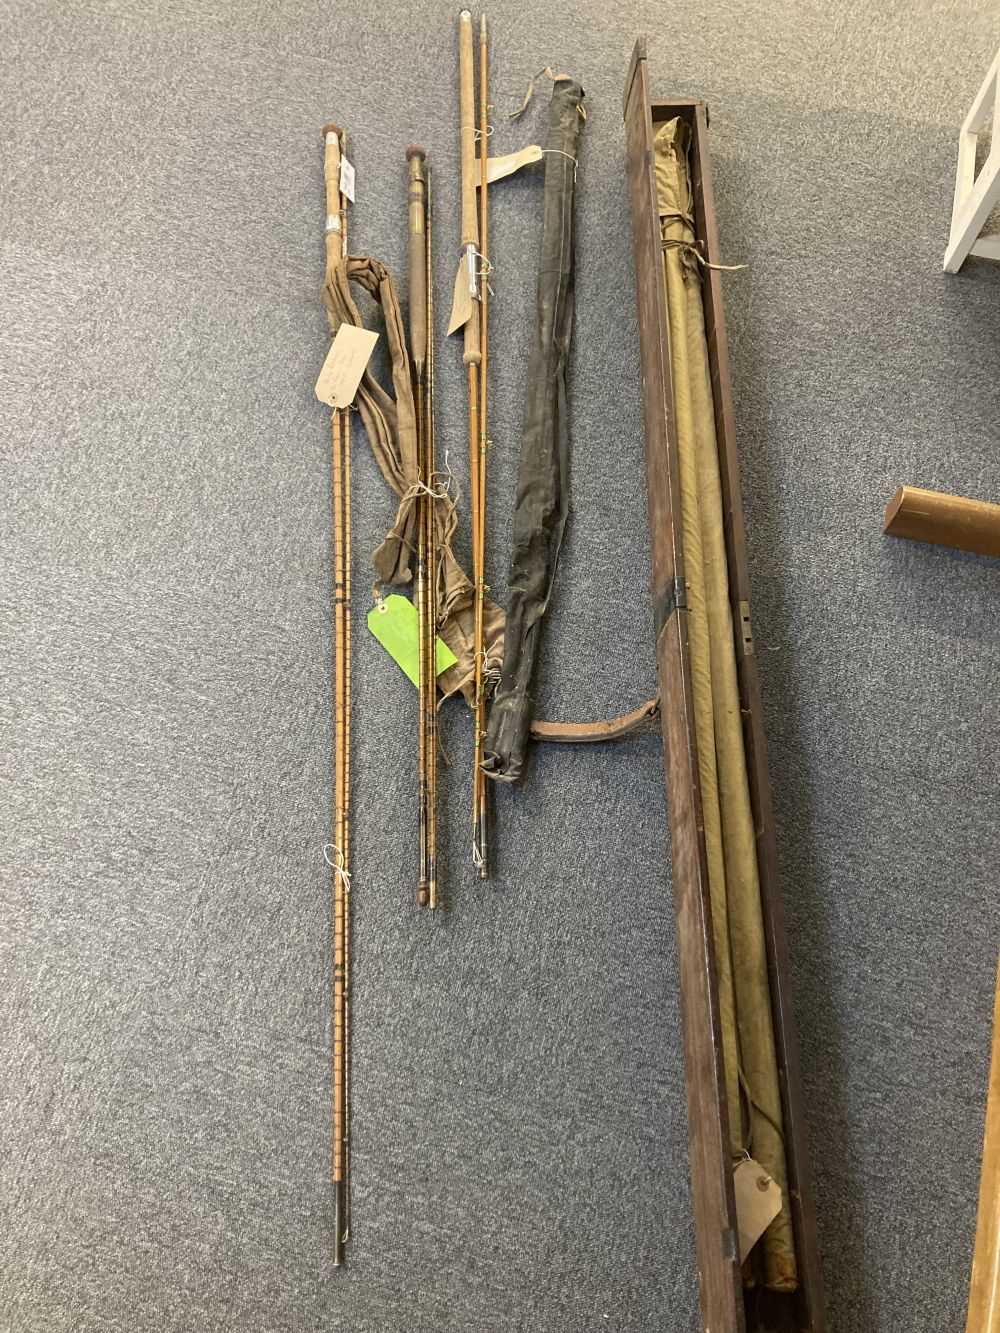 Lot 424 - Fishing Rods. A collection of vintage fishing rods